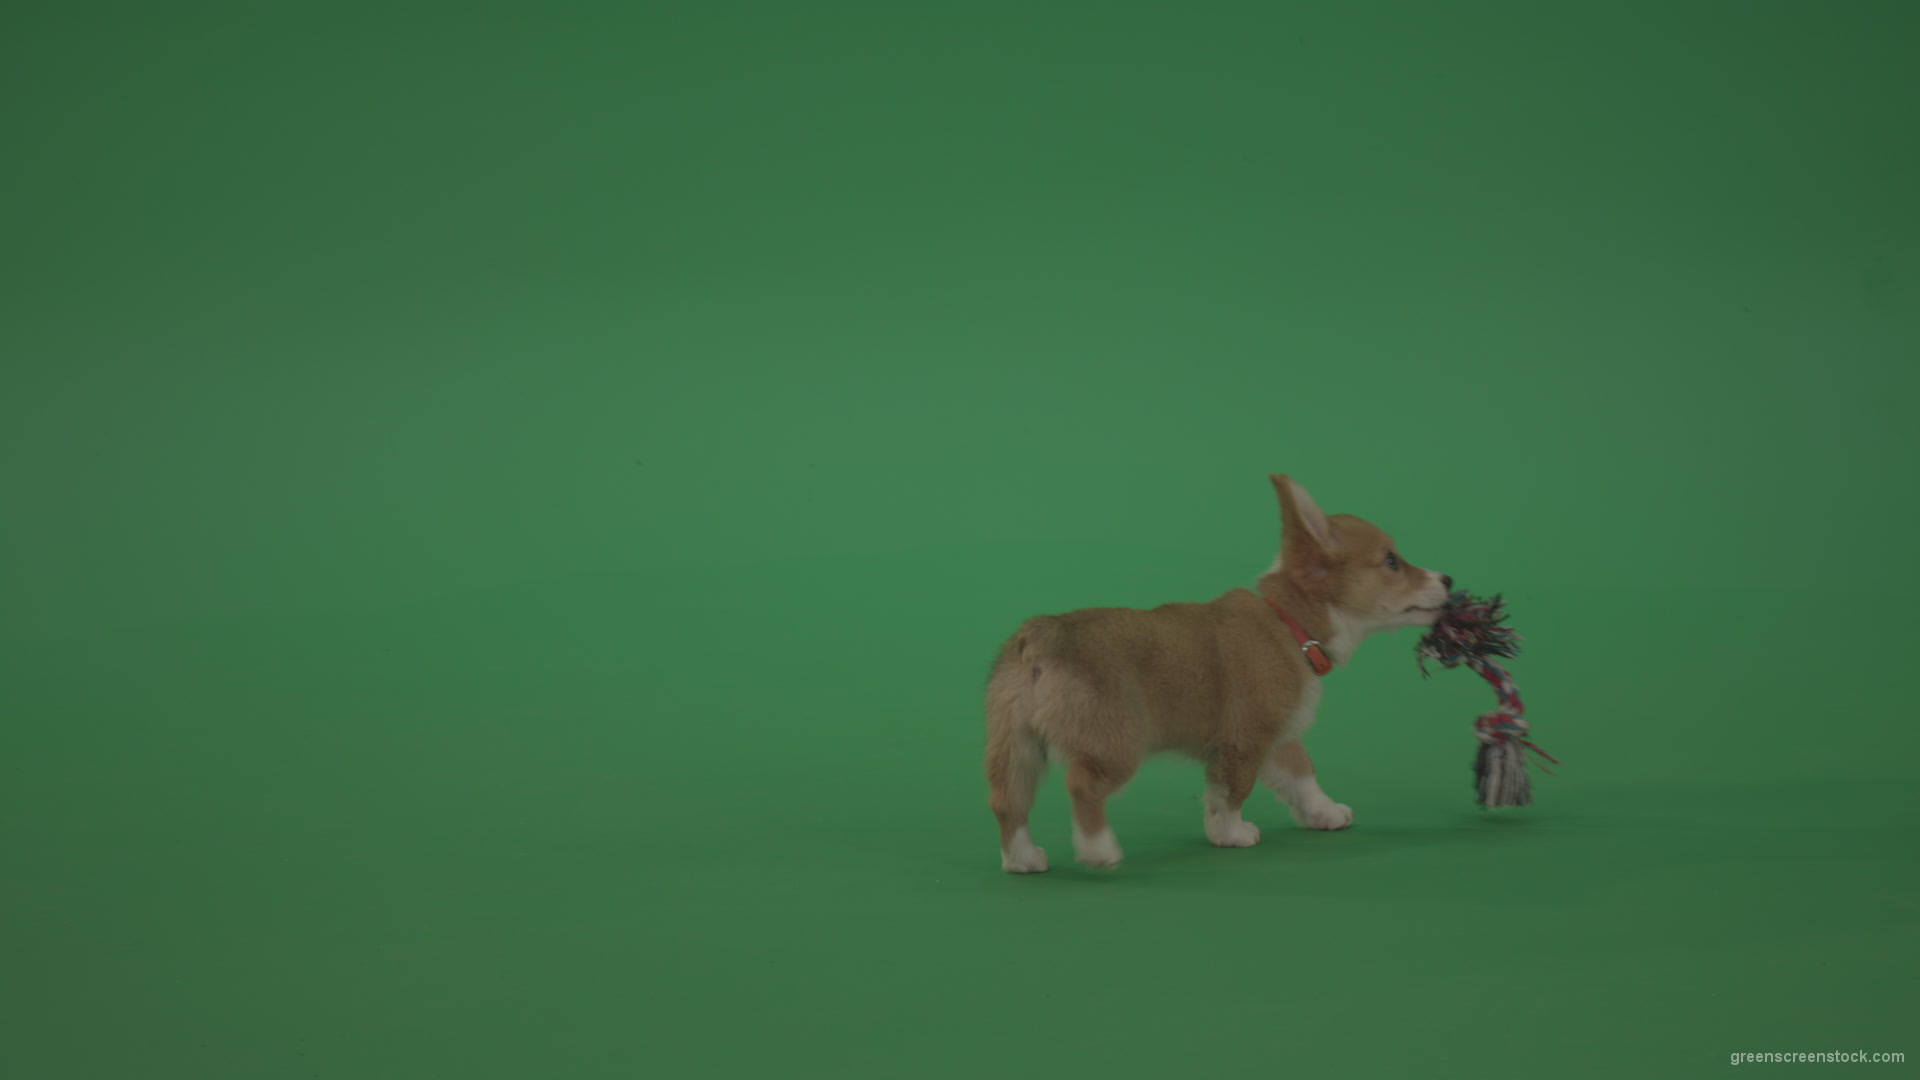 Small-toy-Korgi-welsh-dog-play-with-doll-on-green-screen-isolated_004 Green Screen Stock